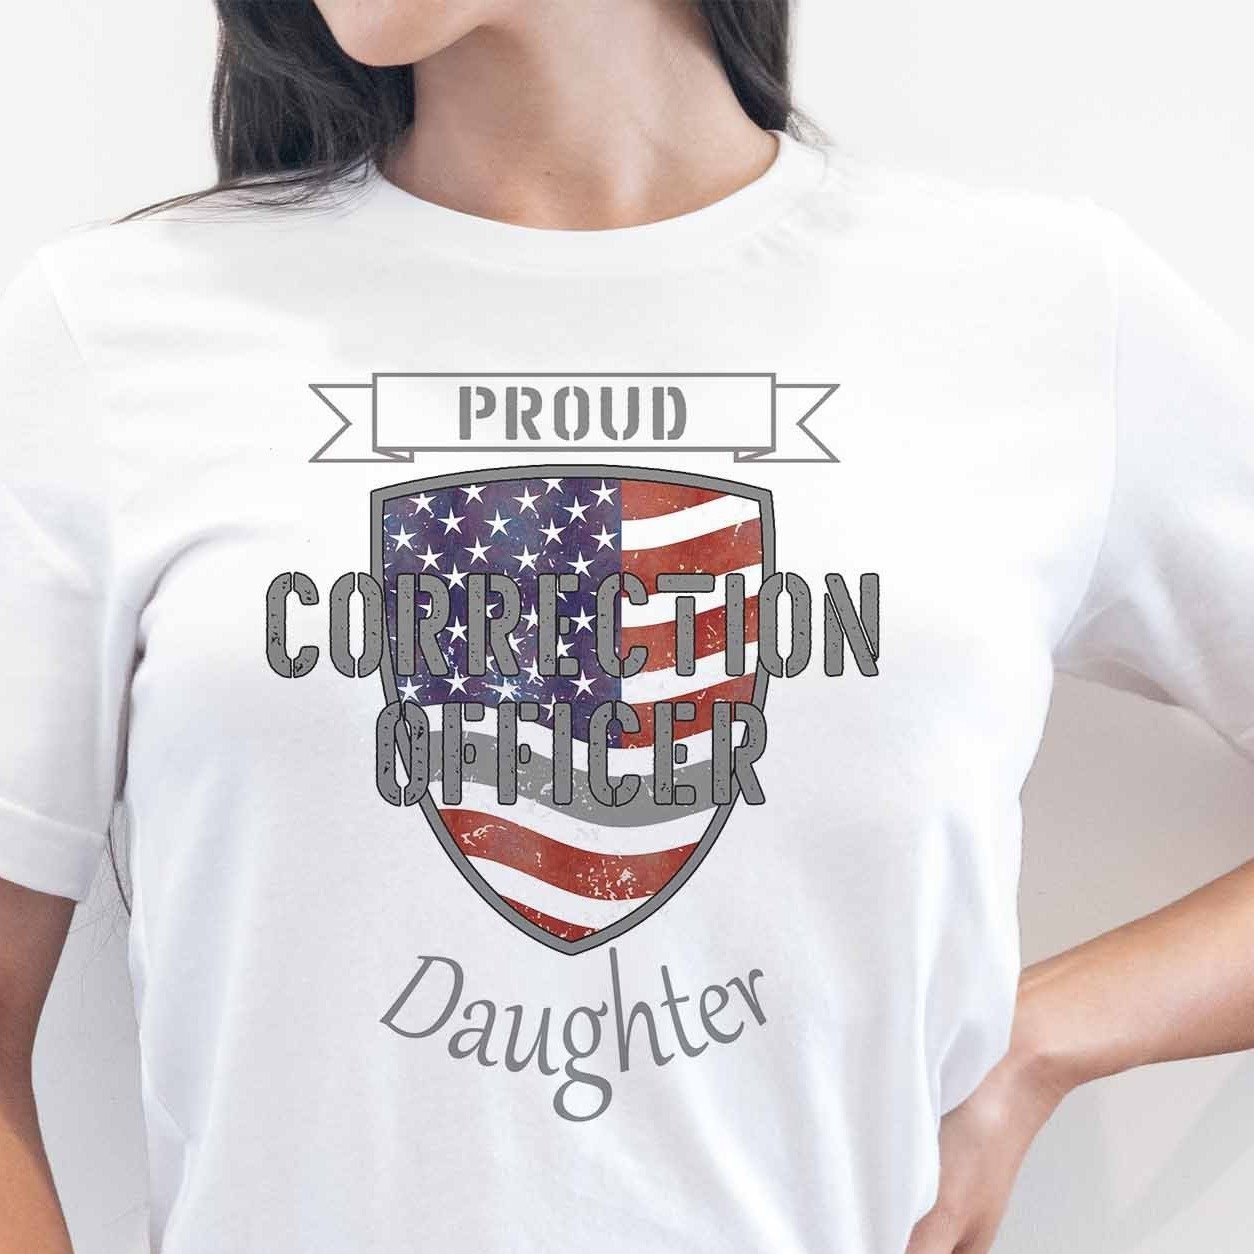 Proud Correction Officer Daughter - My Custom Tee Party